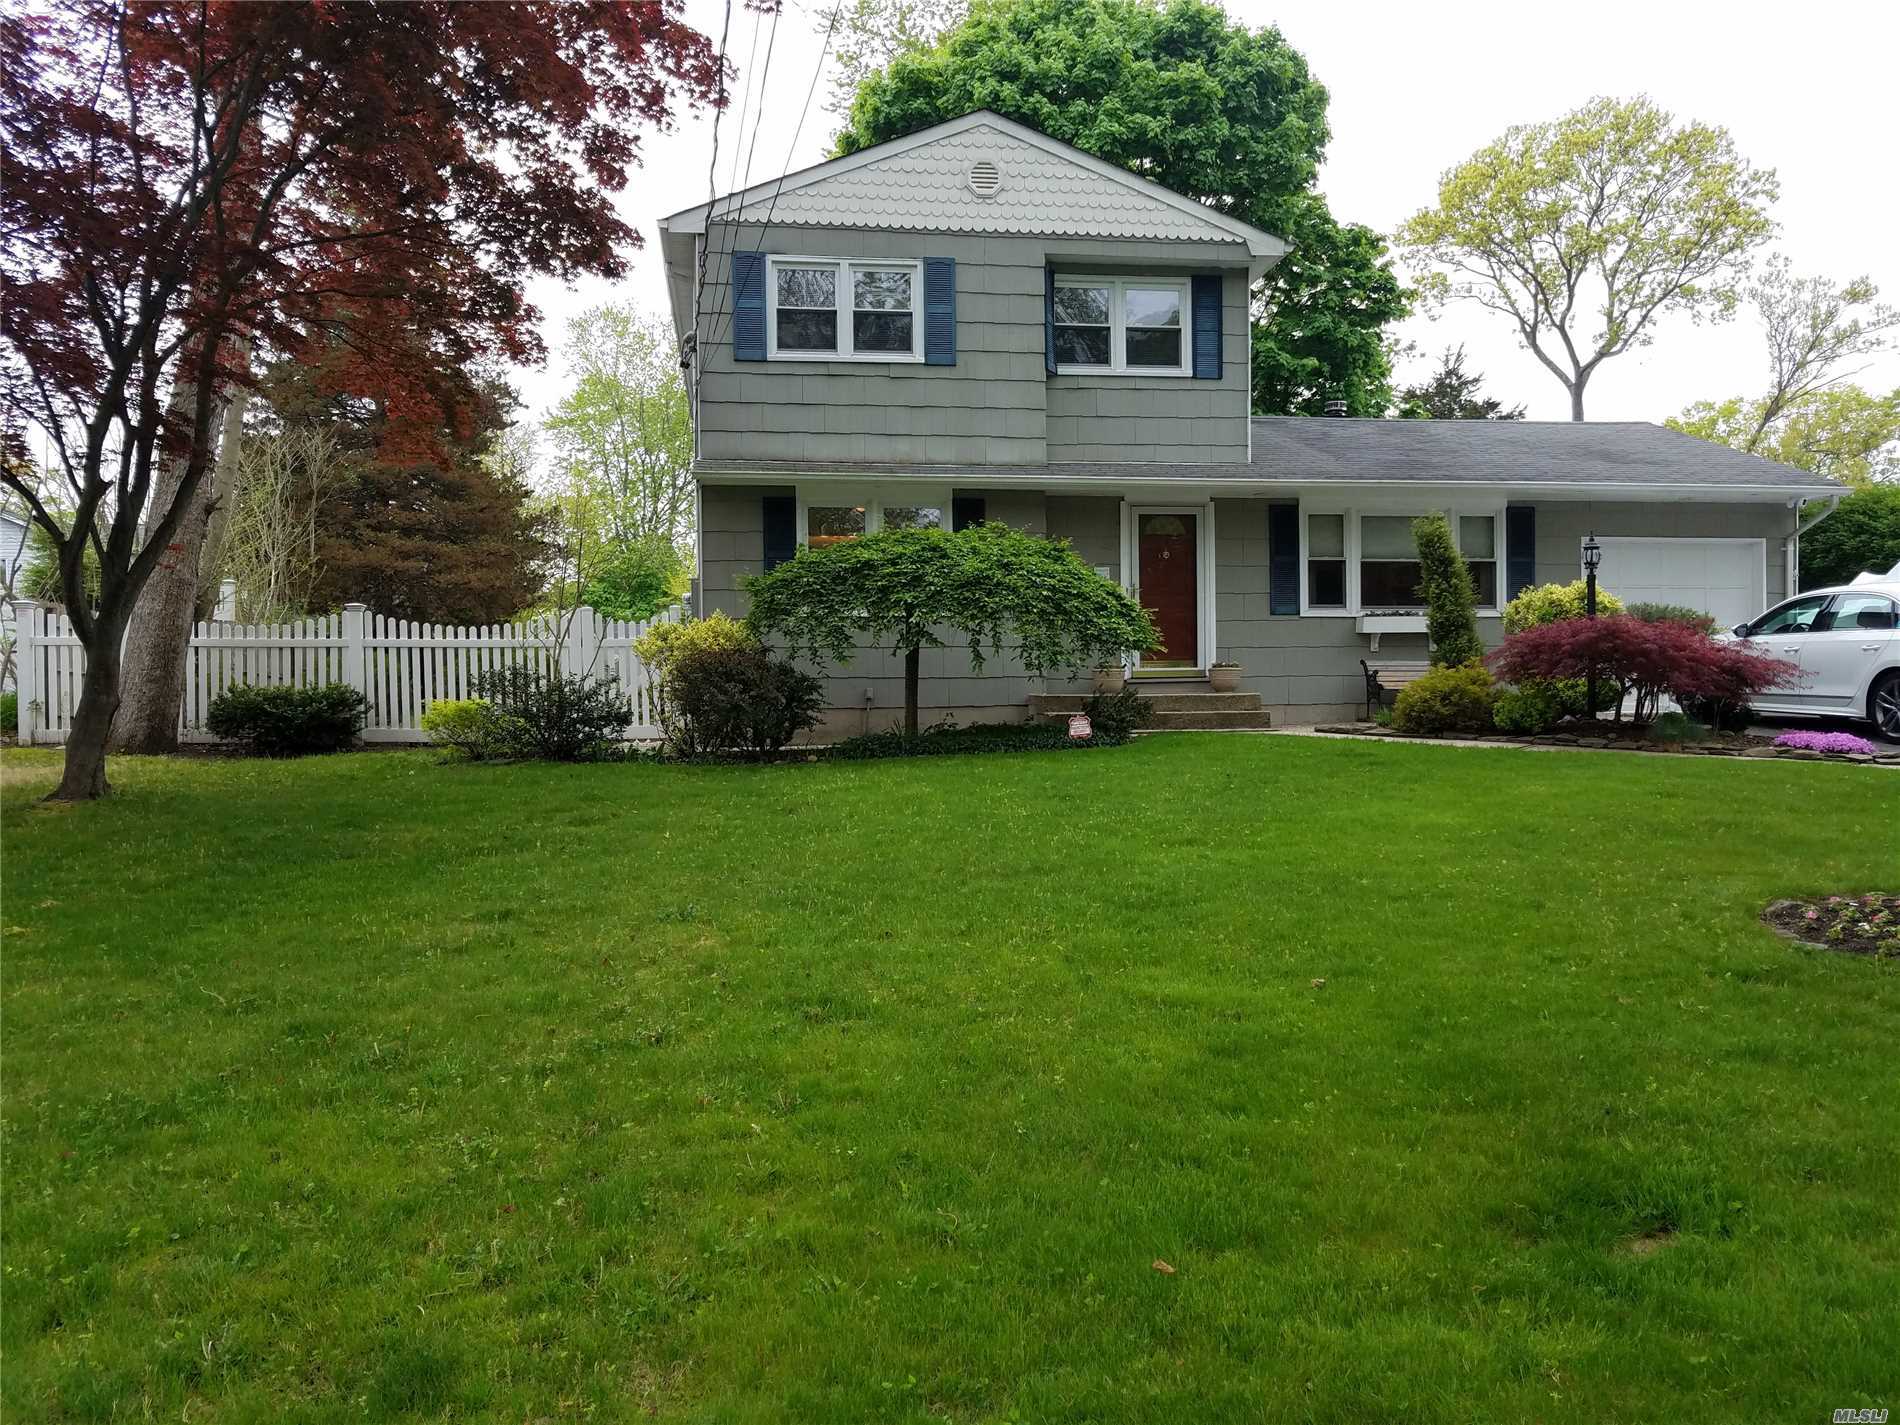 Beautiful Mint Condition Center Hall Colonial With Eat In Kitchen And Formal Dining Room. Gorgeous Den With Fireplace. Perfect For Entertaining. Sprinkler And Alarm System. Close To Transportation And Mall. Near Lake Grove Border. A Must See.